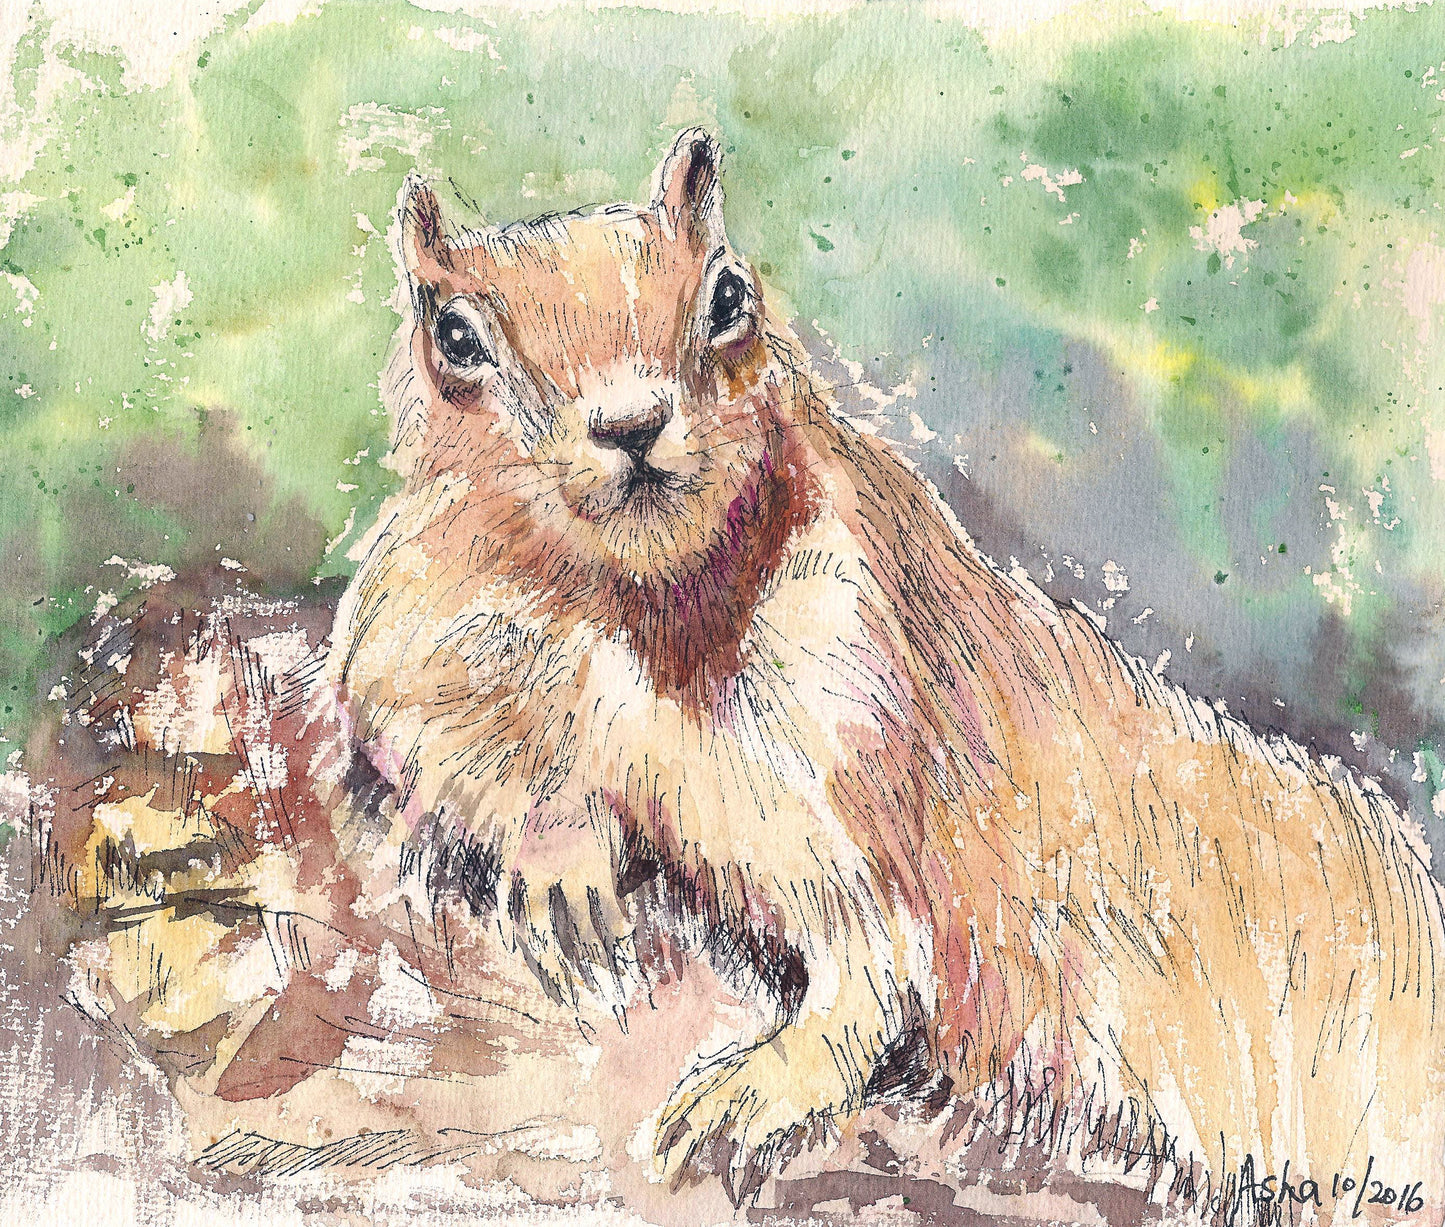 Red Squirrel Sunbathing- Ink and watercolor wash on paper